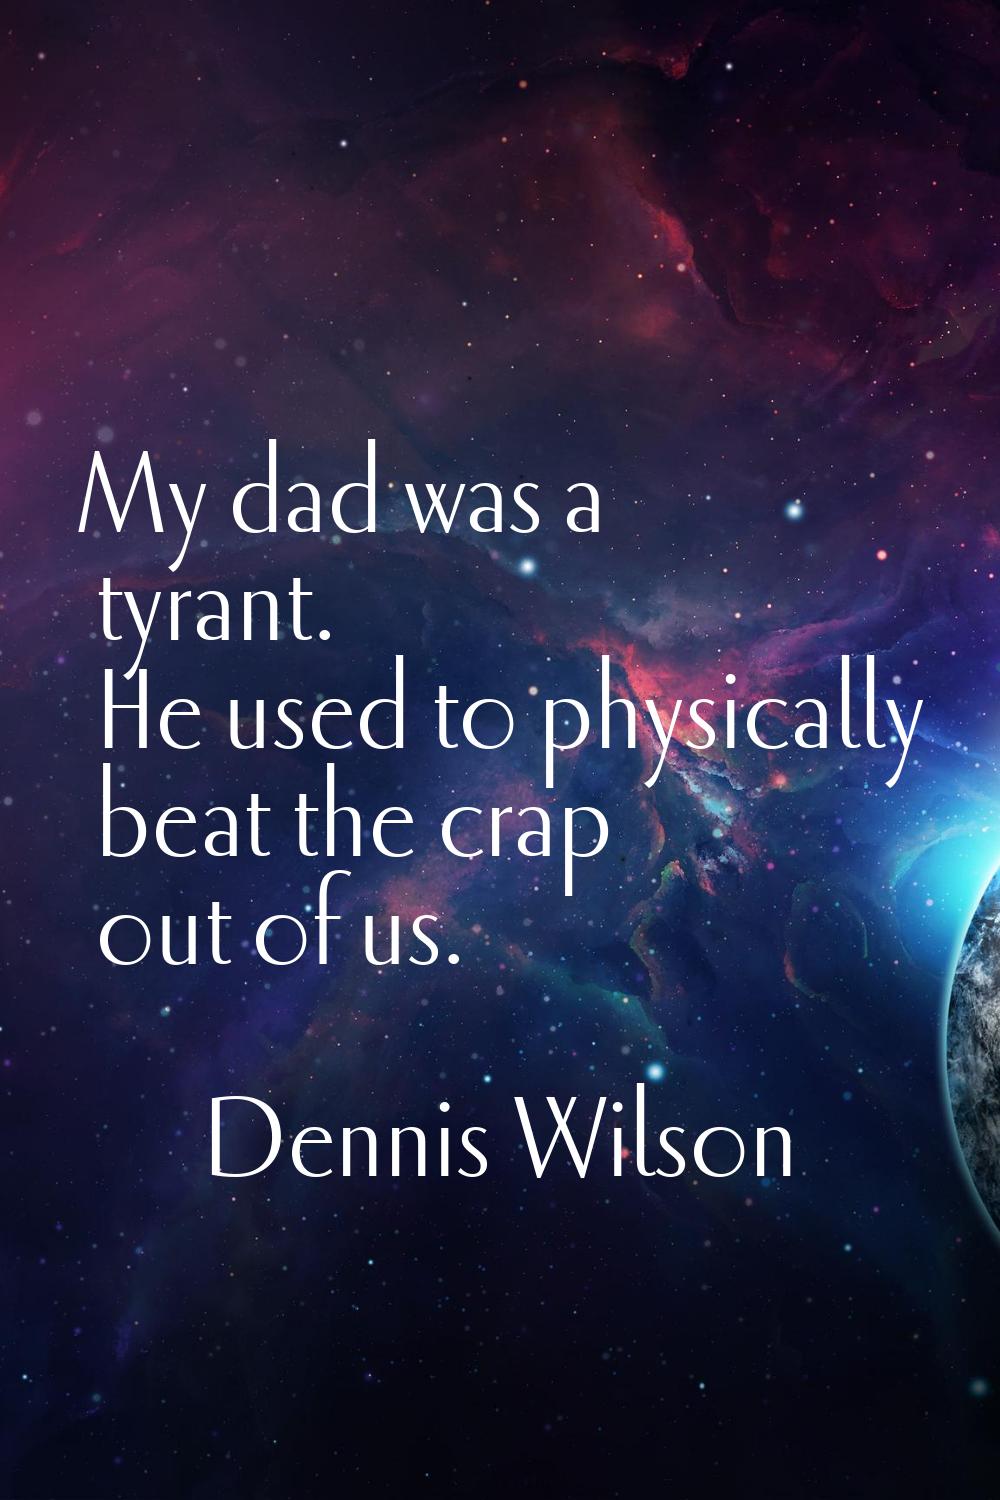 My dad was a tyrant. He used to physically beat the crap out of us.